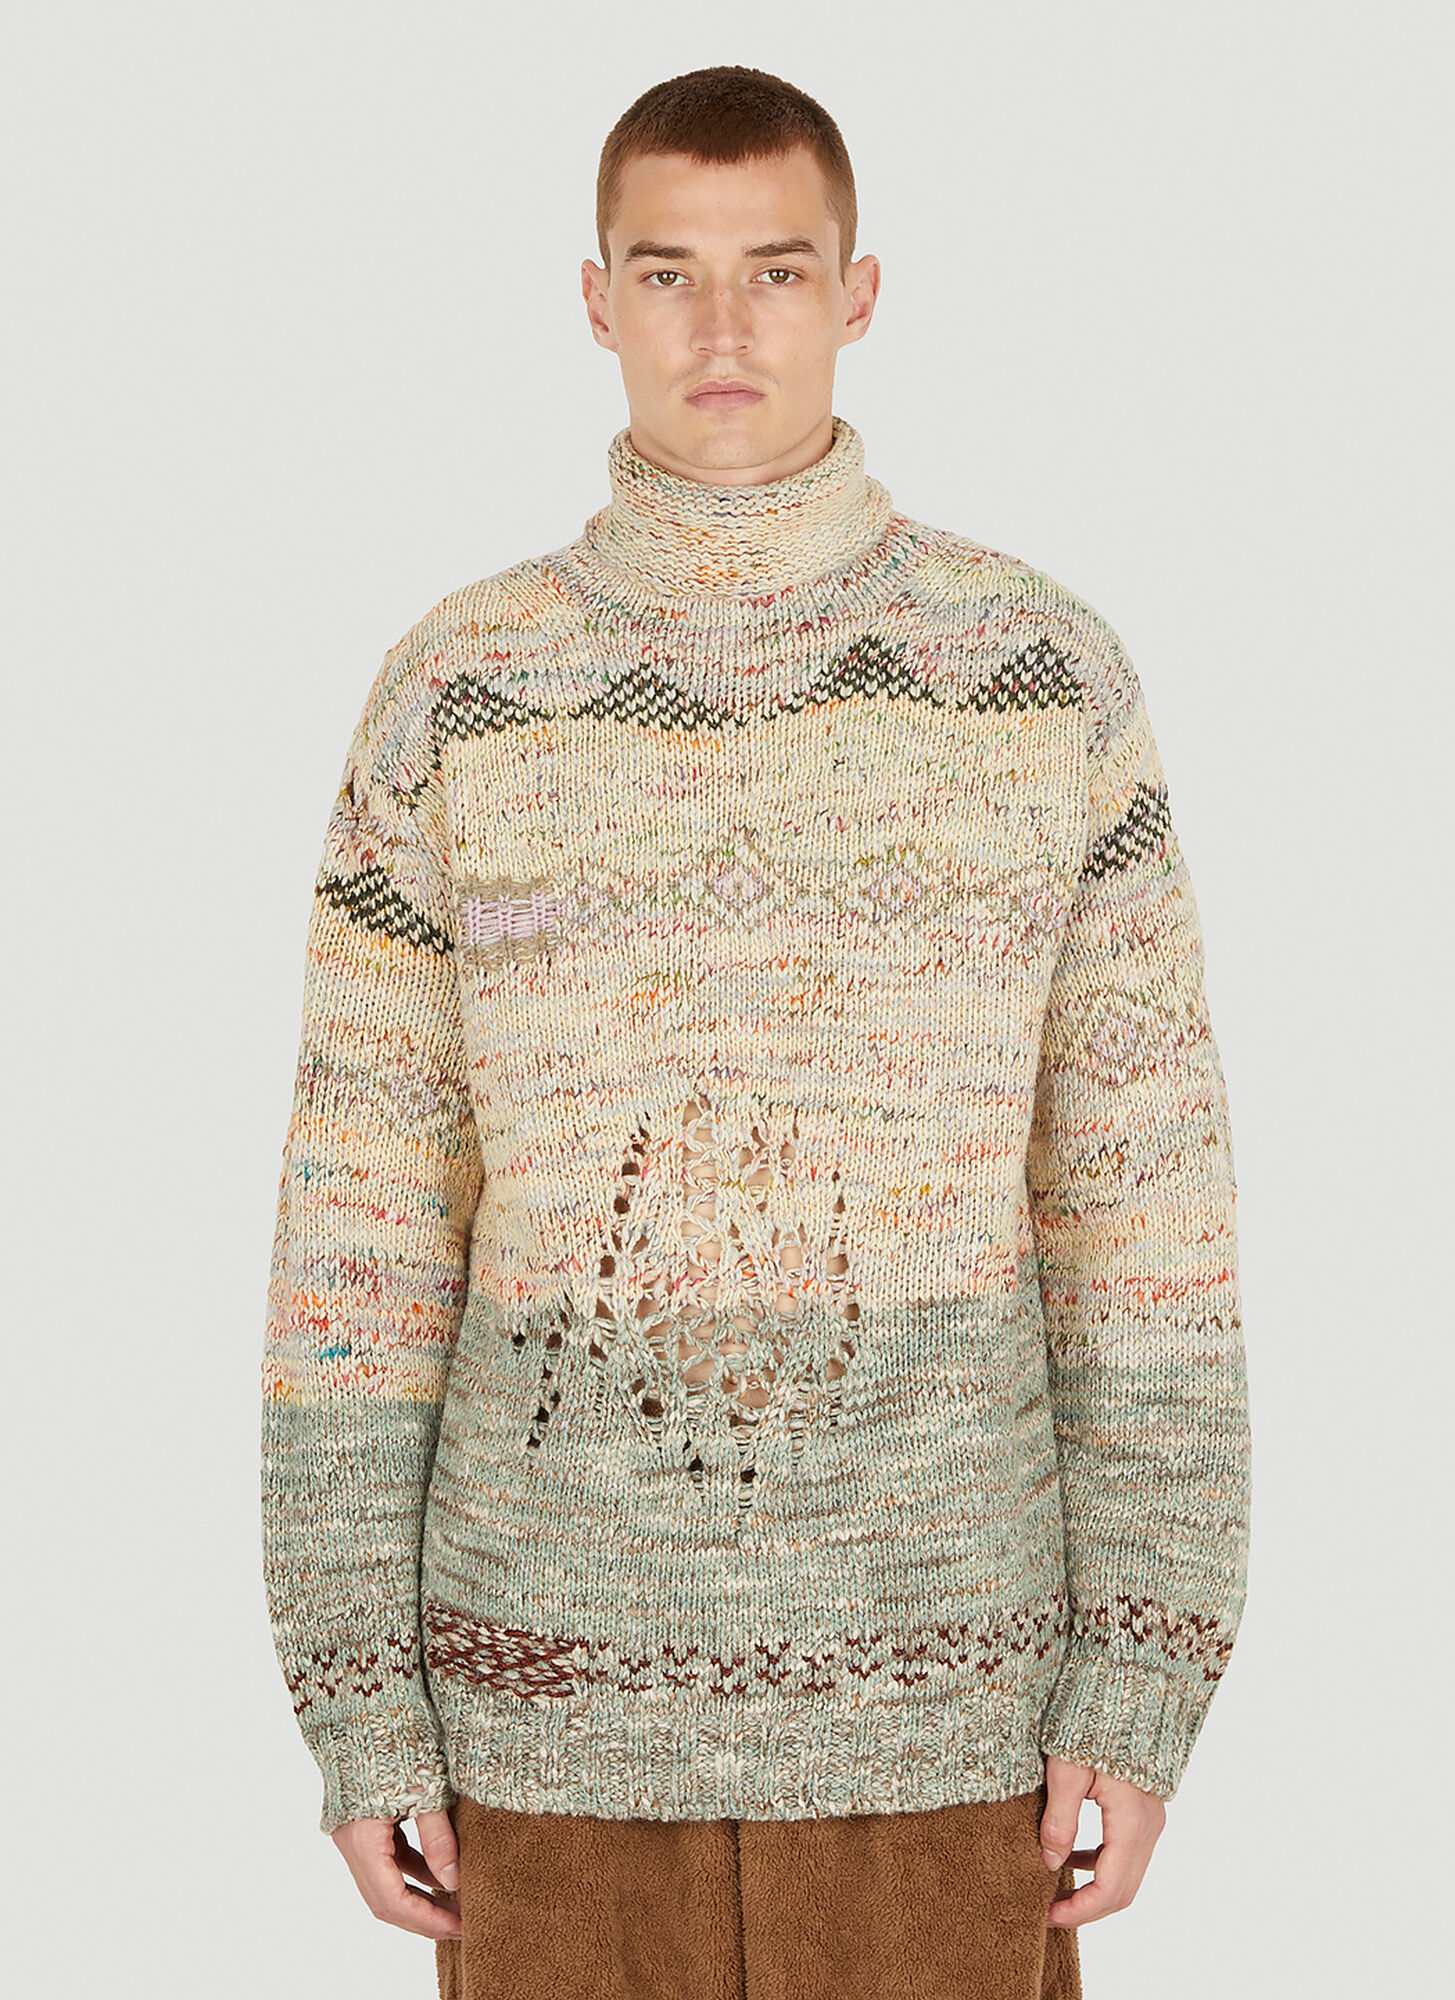 Deconstructed Sweater Male Beige